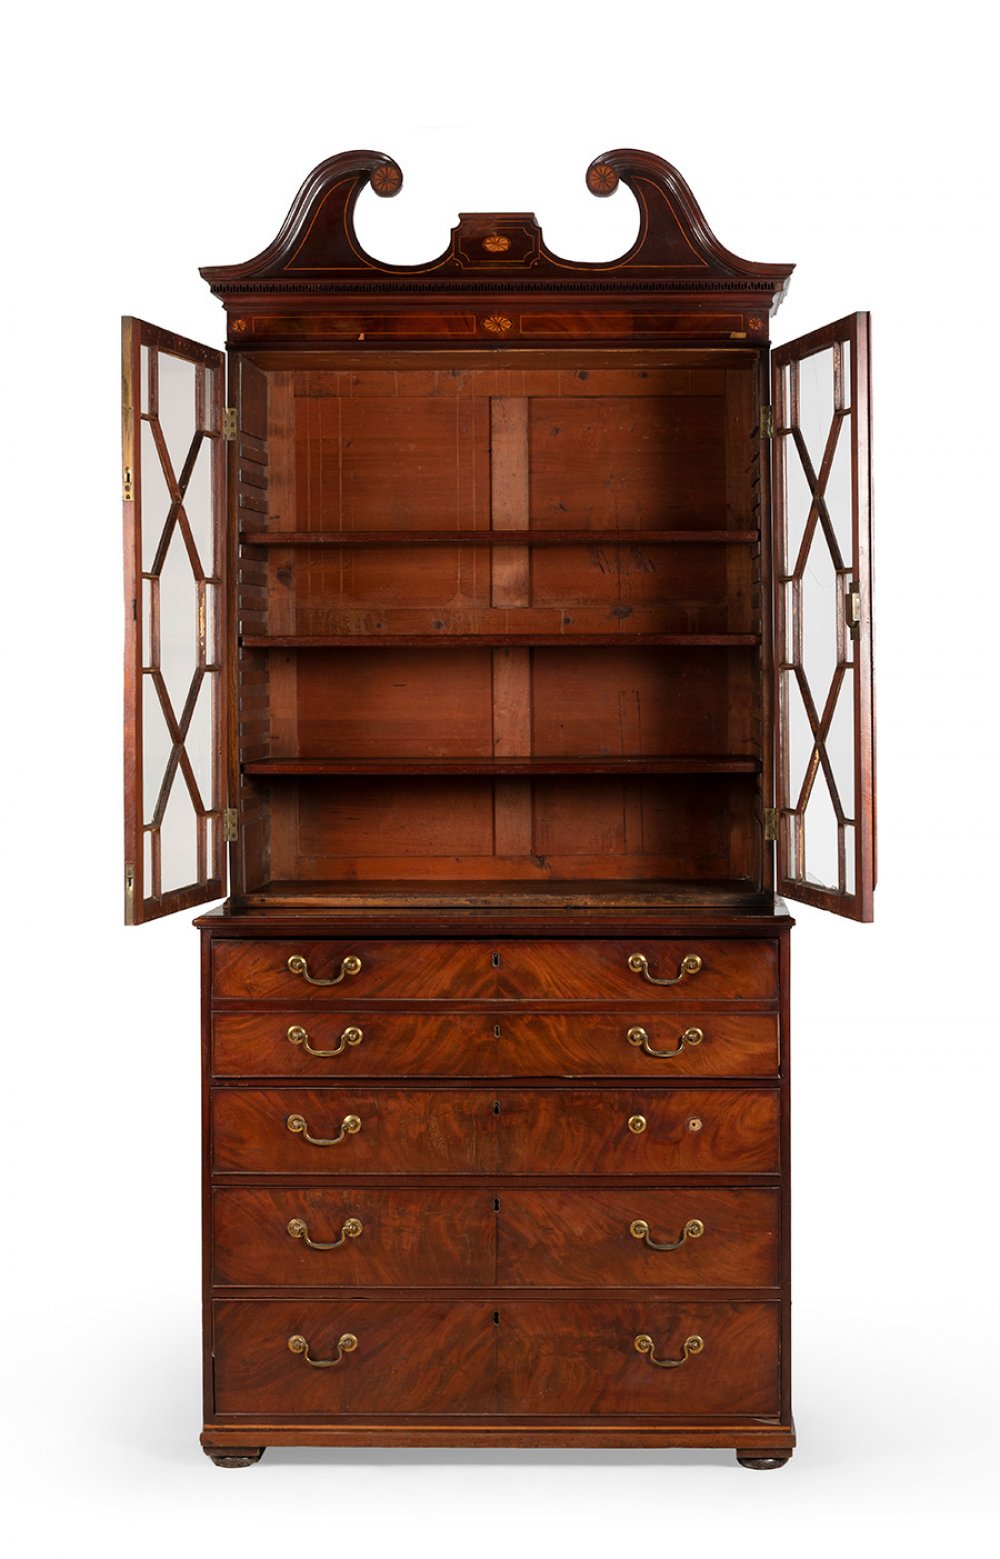 Georgian period desk-bookcase. England, late 18th-early 19th century.Mahogany wood and lemongrass - Image 7 of 7